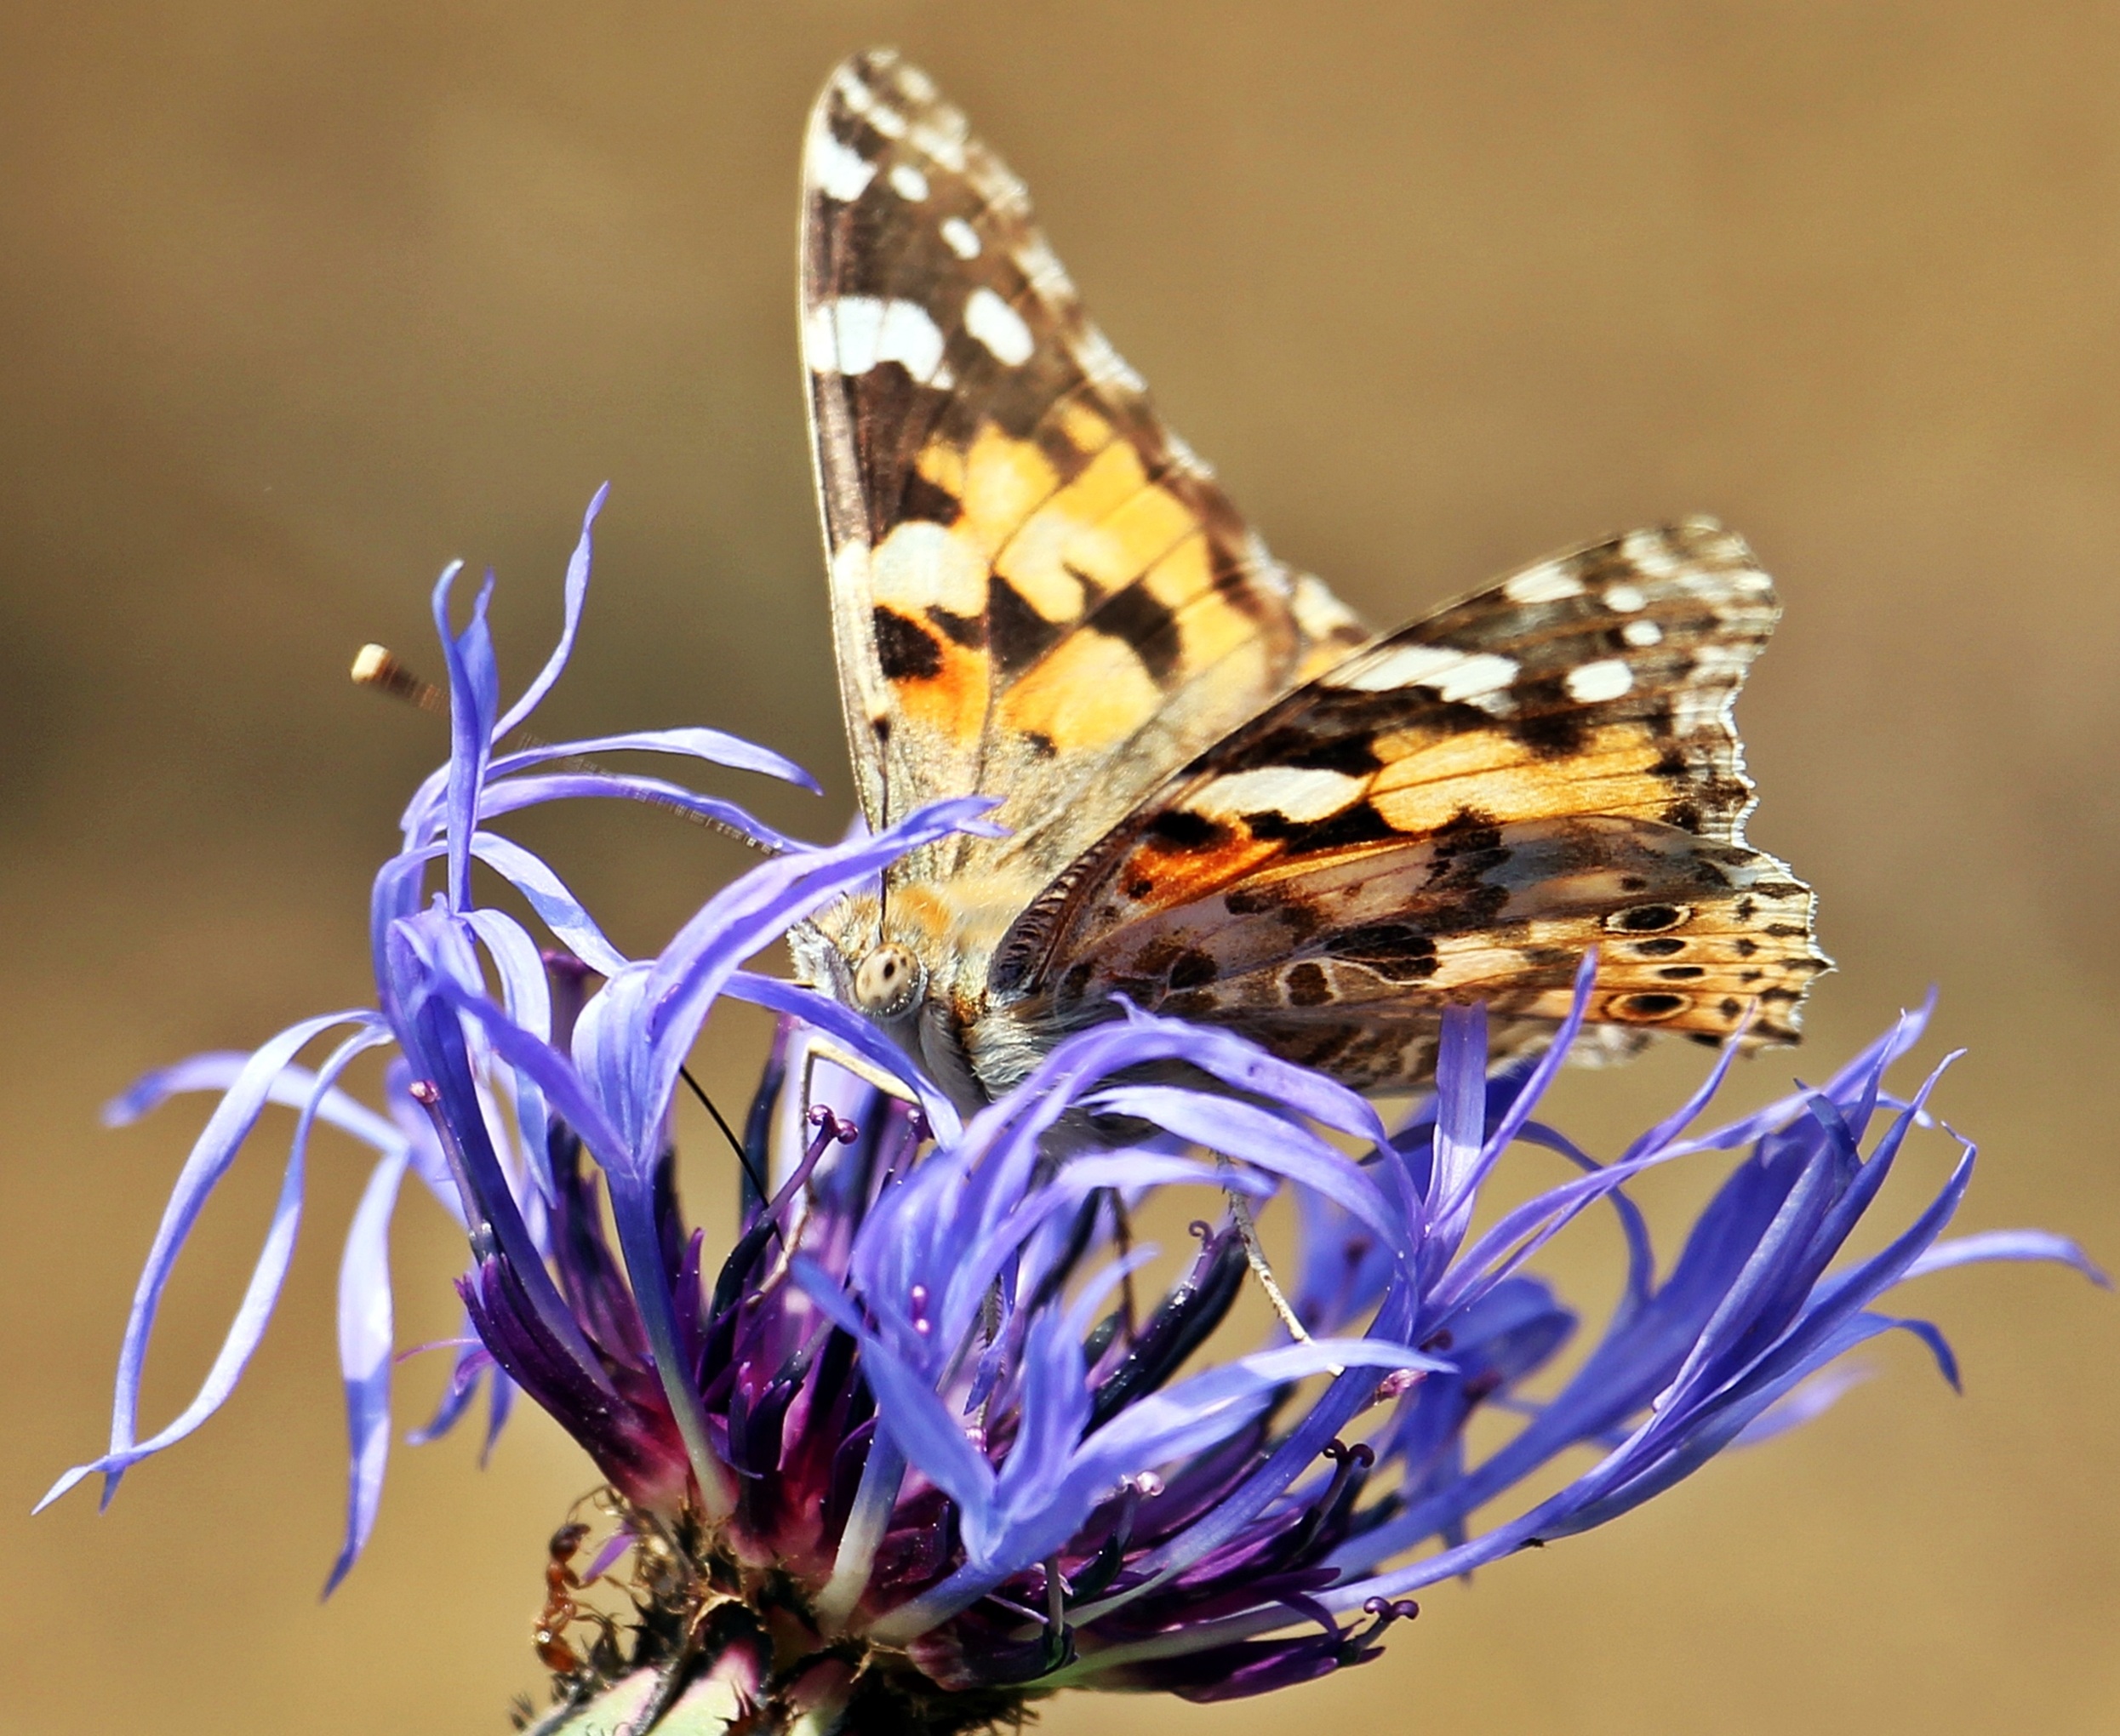 Butterfly on the flower photo